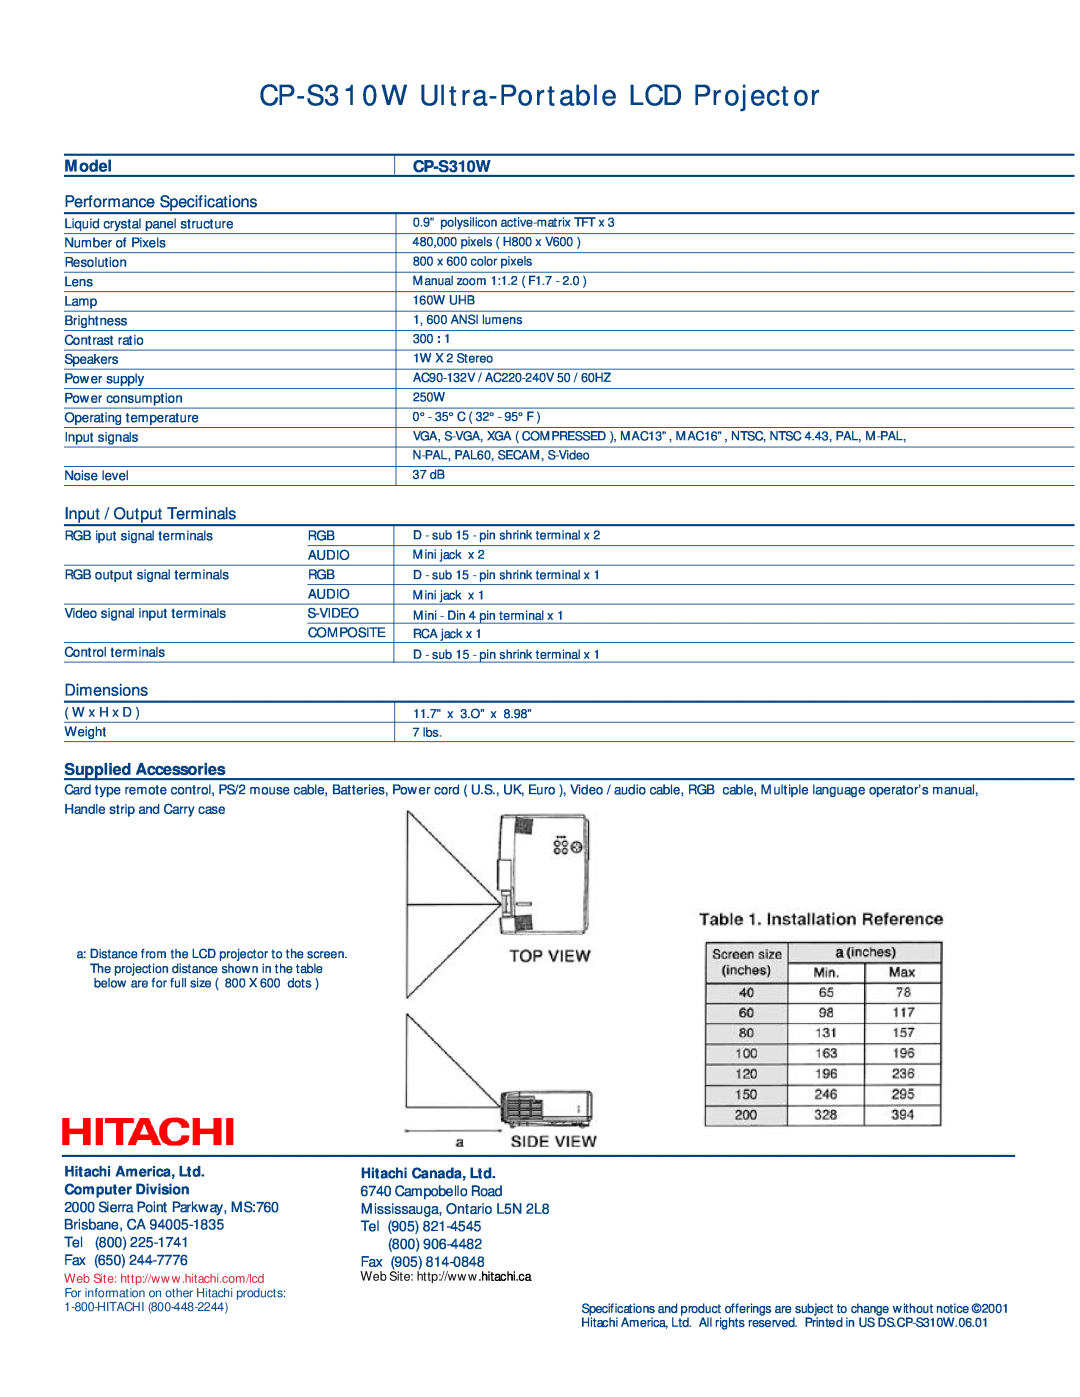 Hitachi CP-S310W Ultra-PortableLCD Projector, Model, Performance Specifications, Input / Output Terminals, Dimensions 